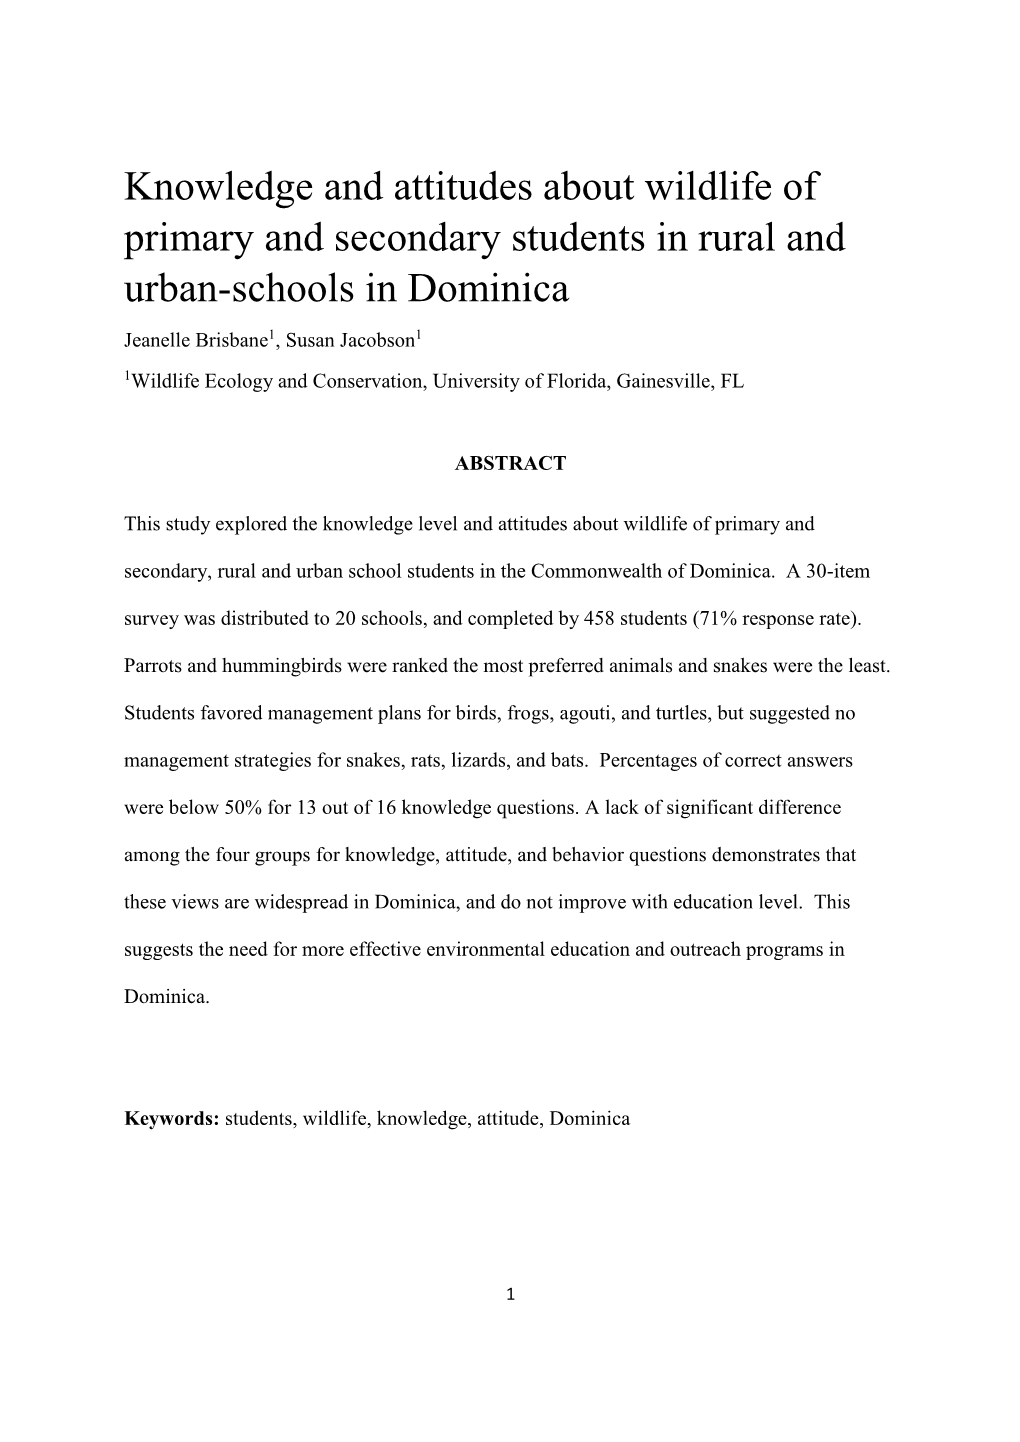 Knowledge and Attitudes About Wildlife of Primary and Secondary